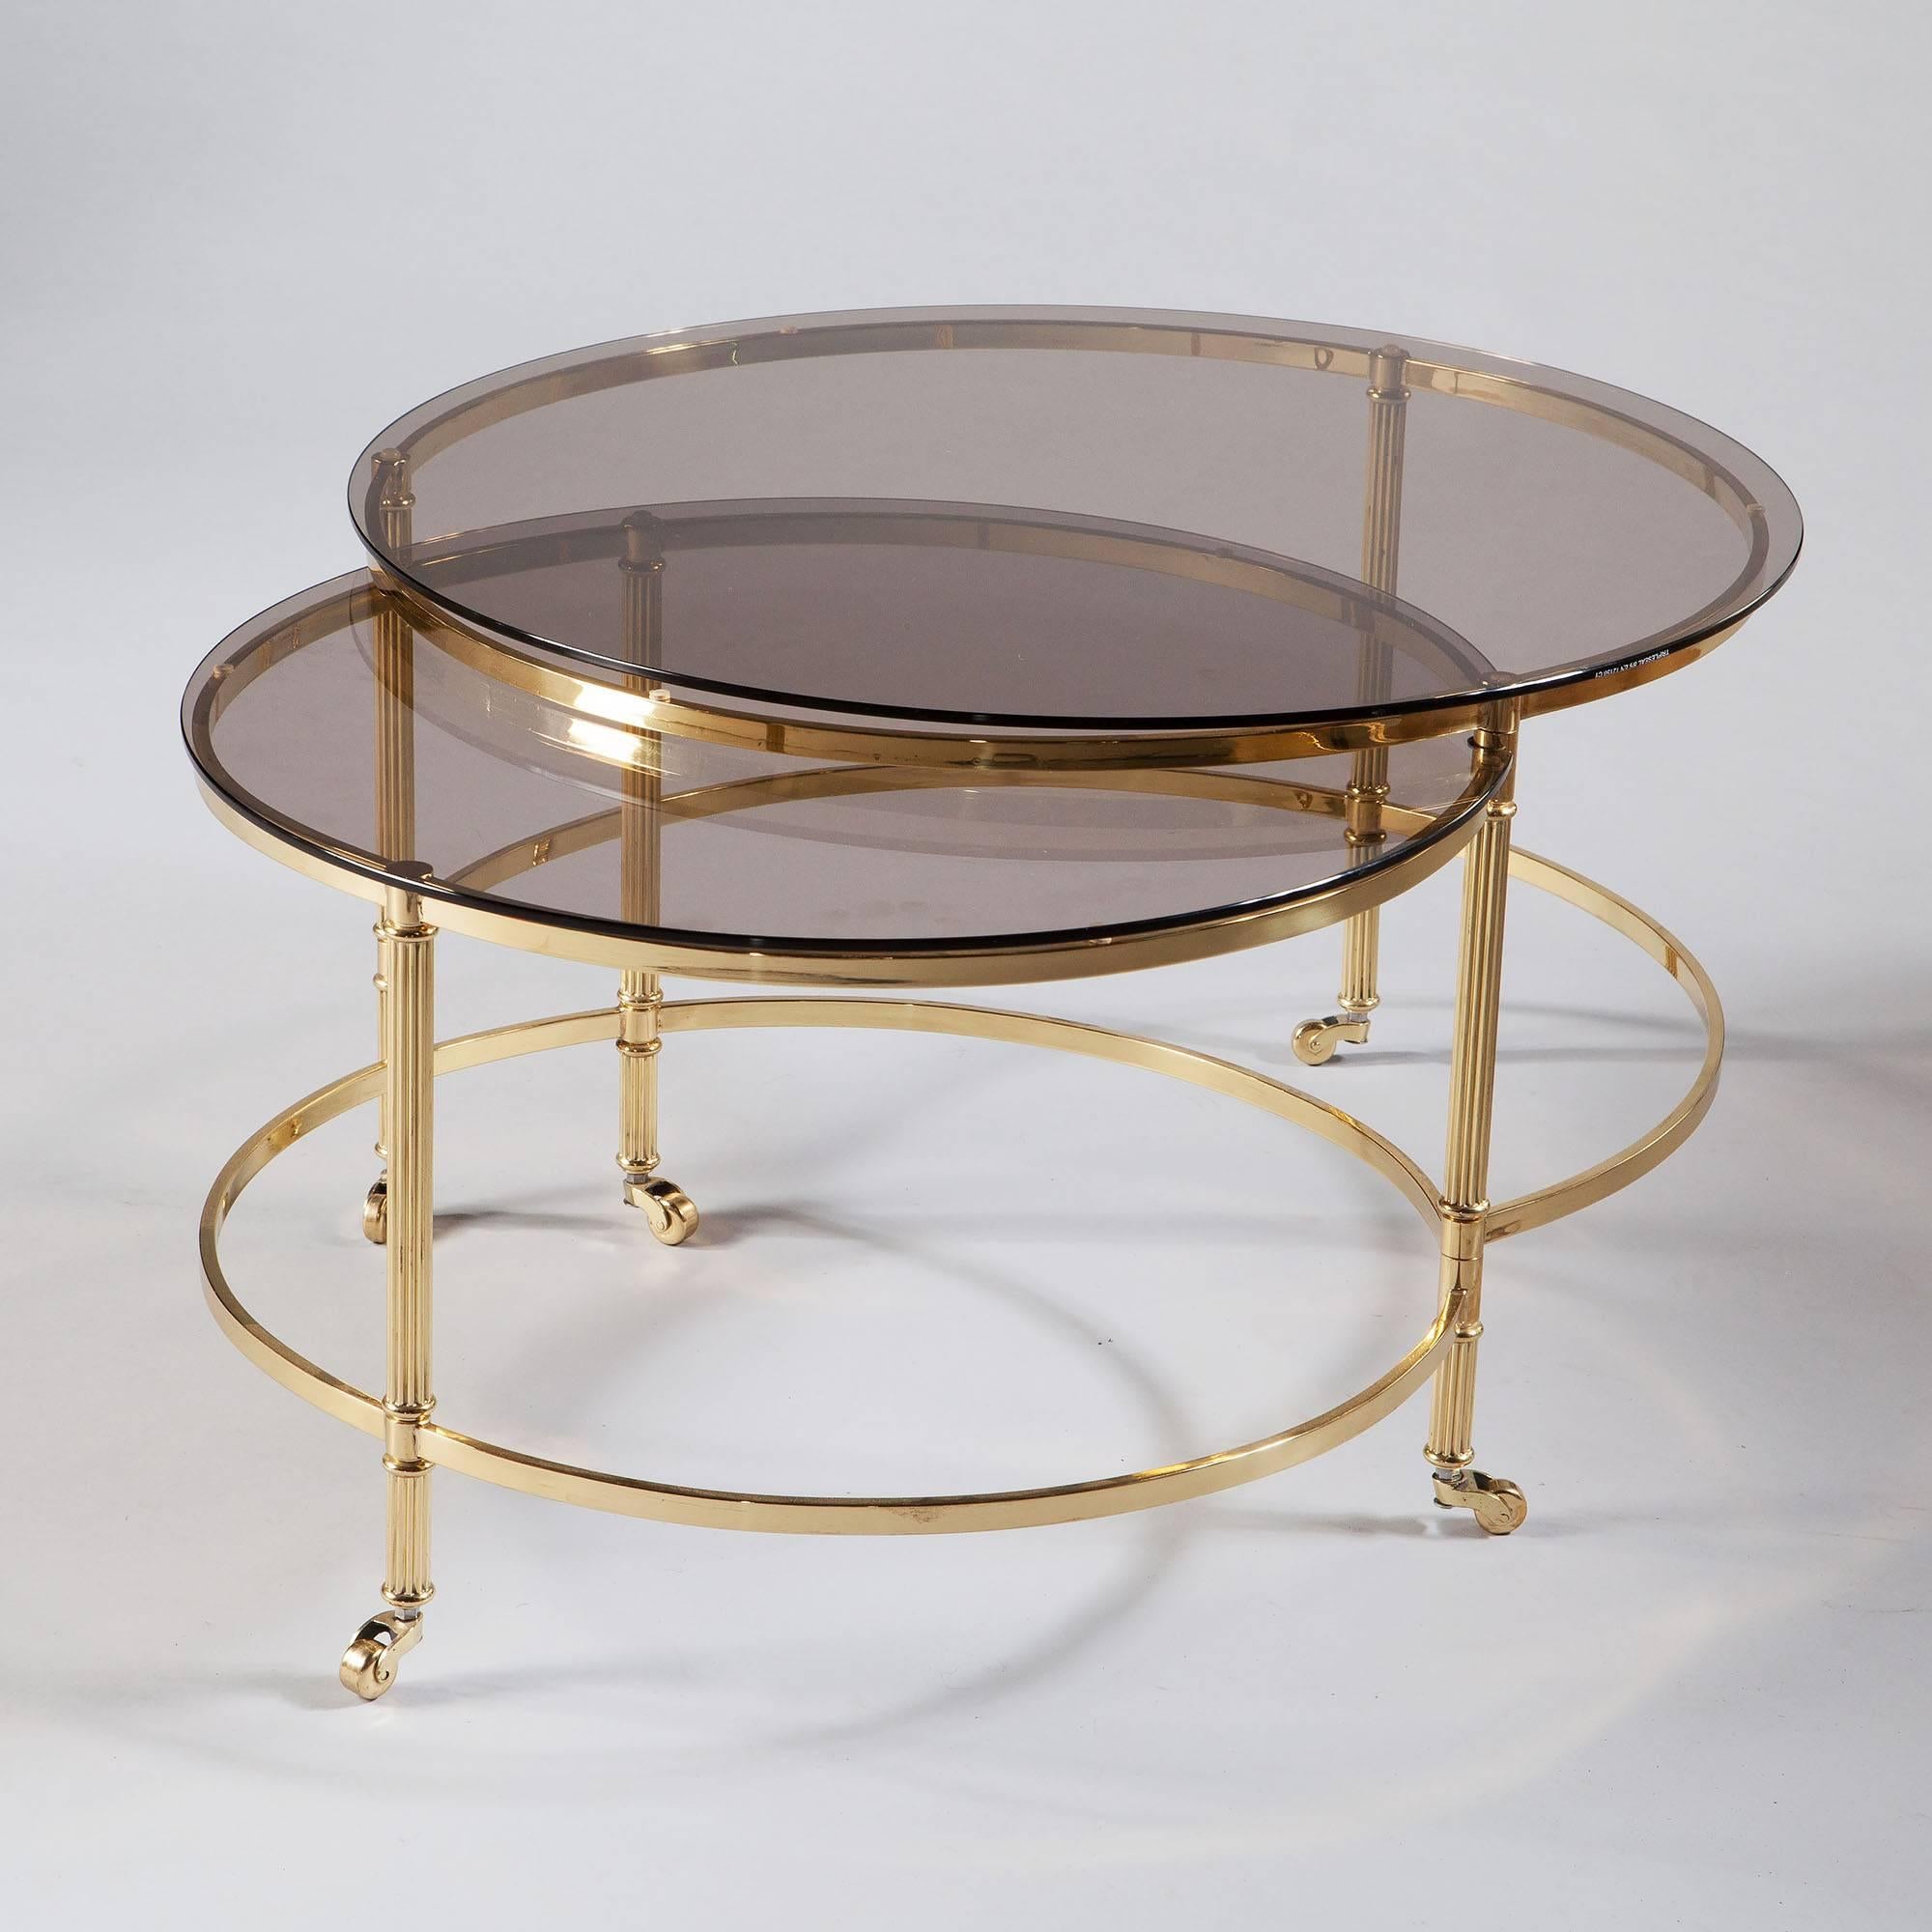 An unusual patent Mid-Century circular lacquered brass occasional table with reeded columns terminating in brass casters. The table disguises within it a second tier that can roll out to form a separate though joined table,

France,